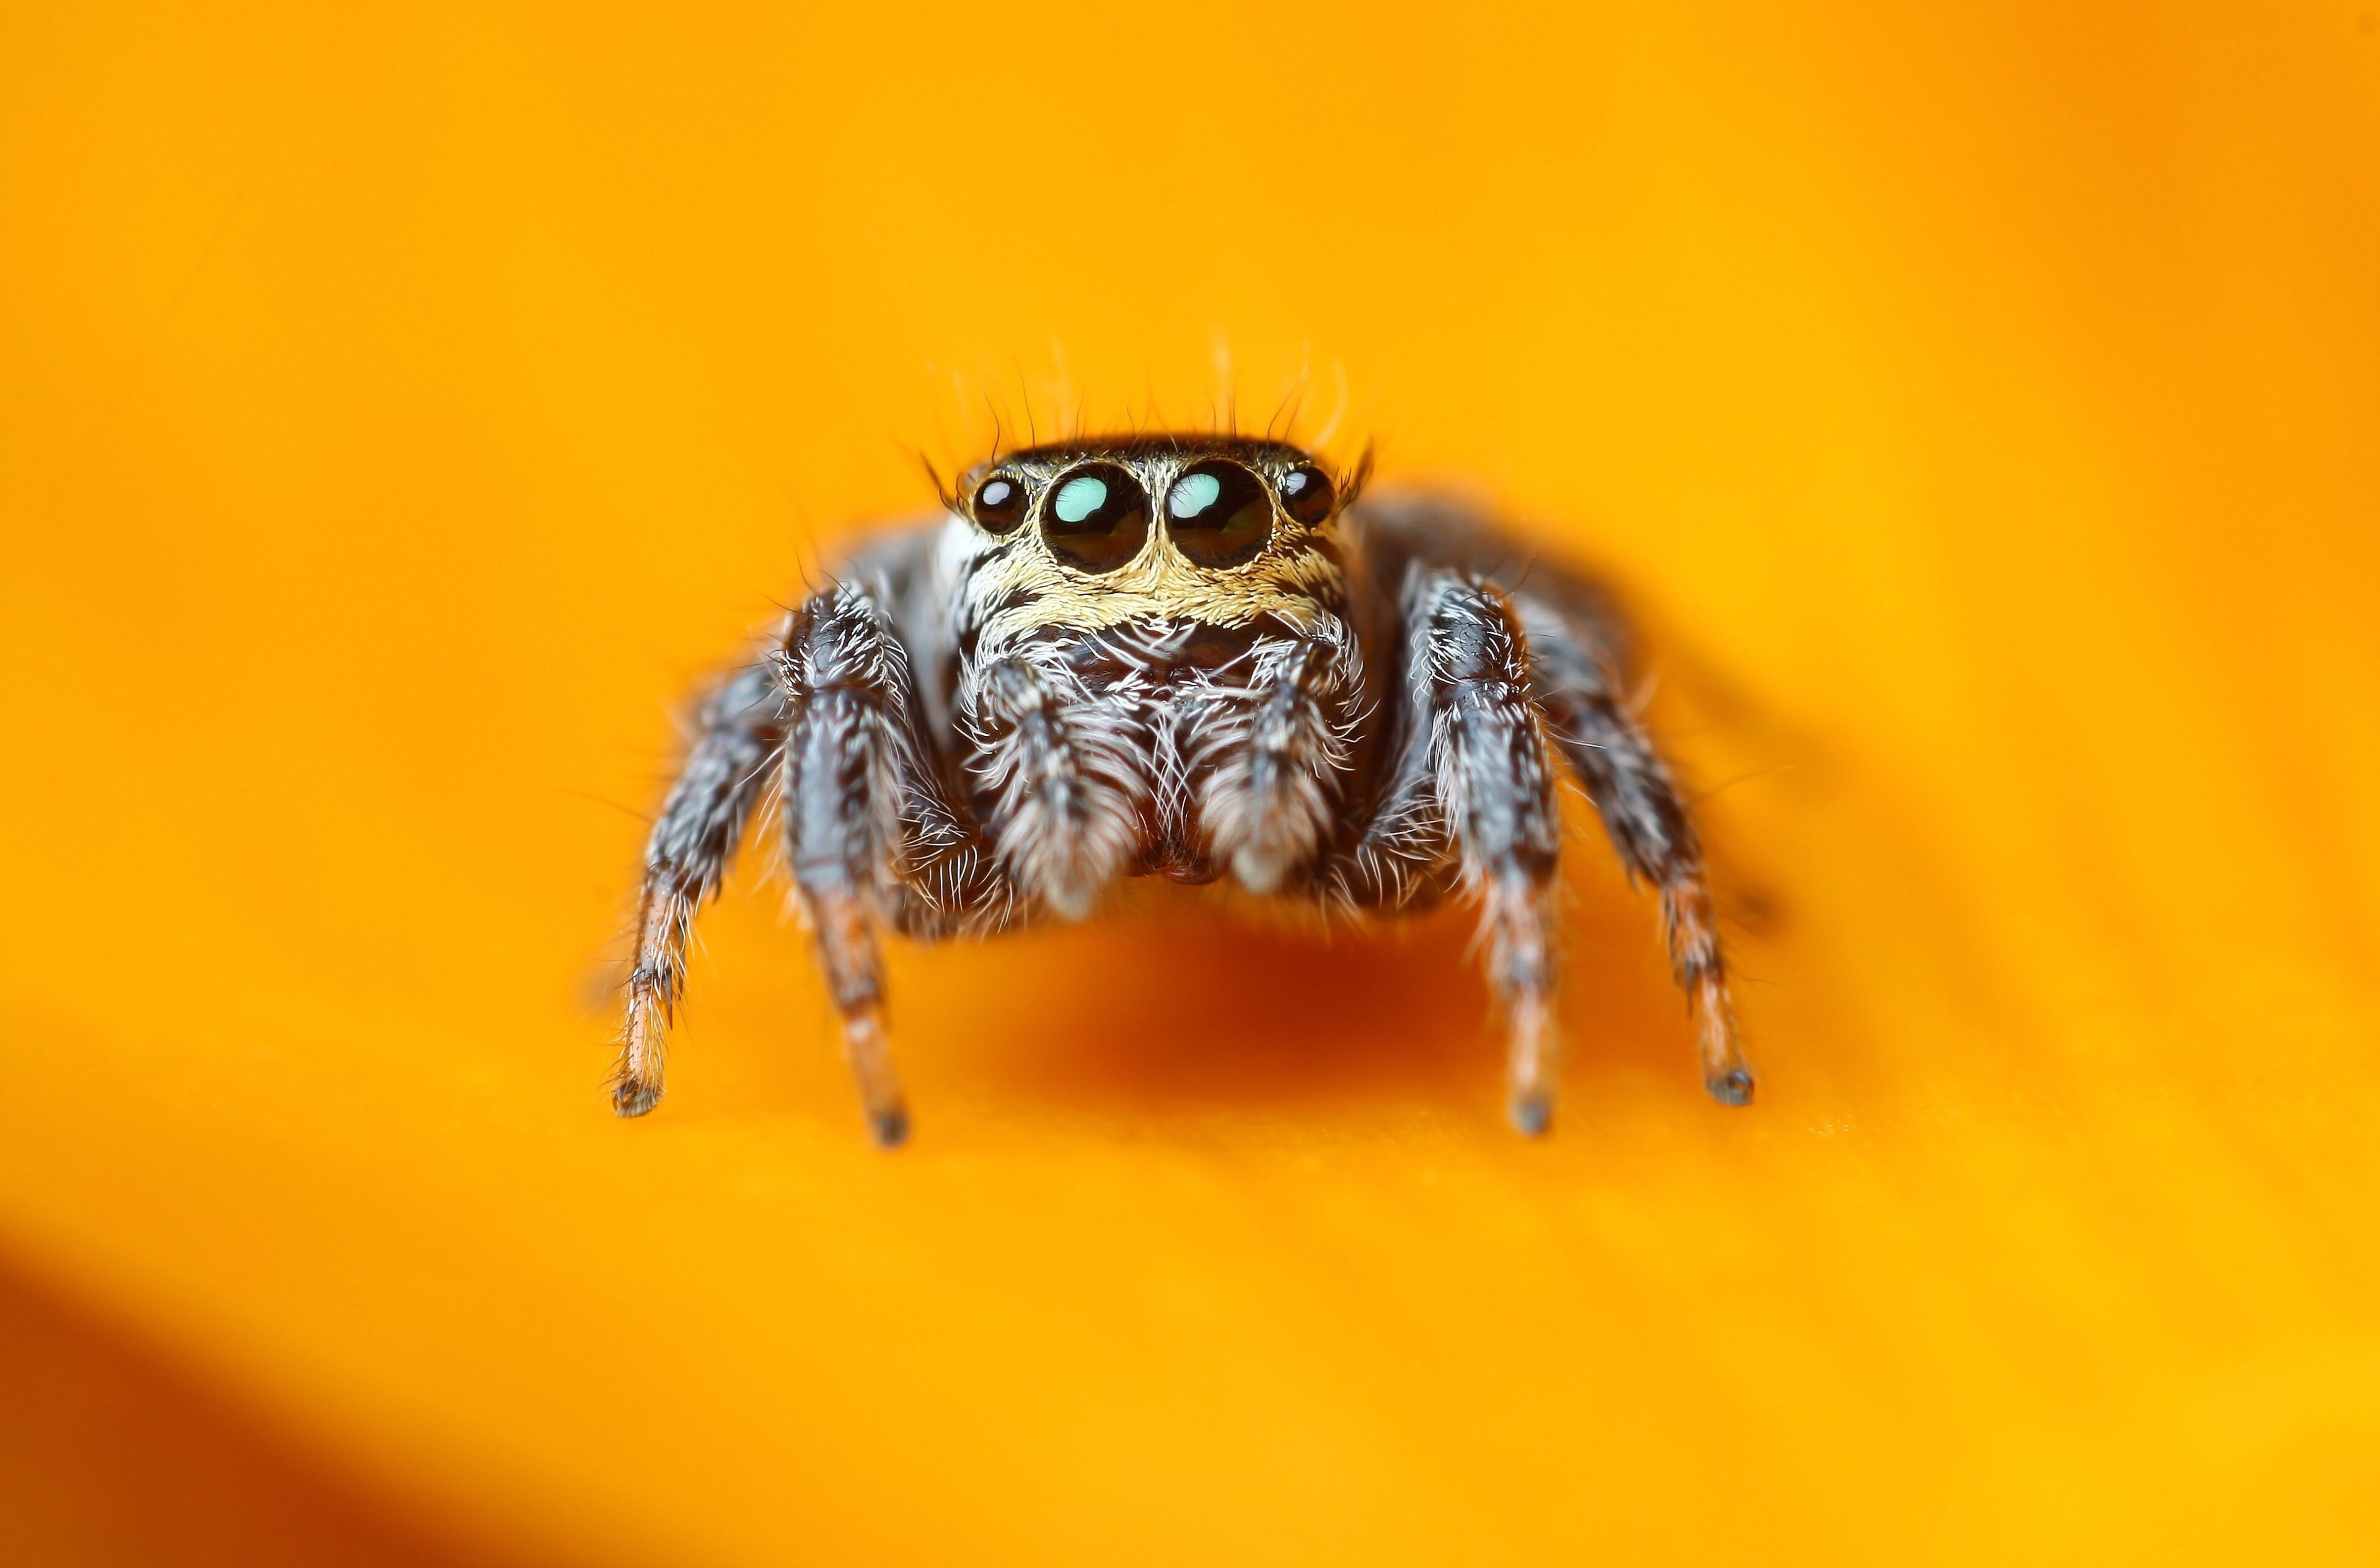 jumping spider 4k high quality image. Jumping spider